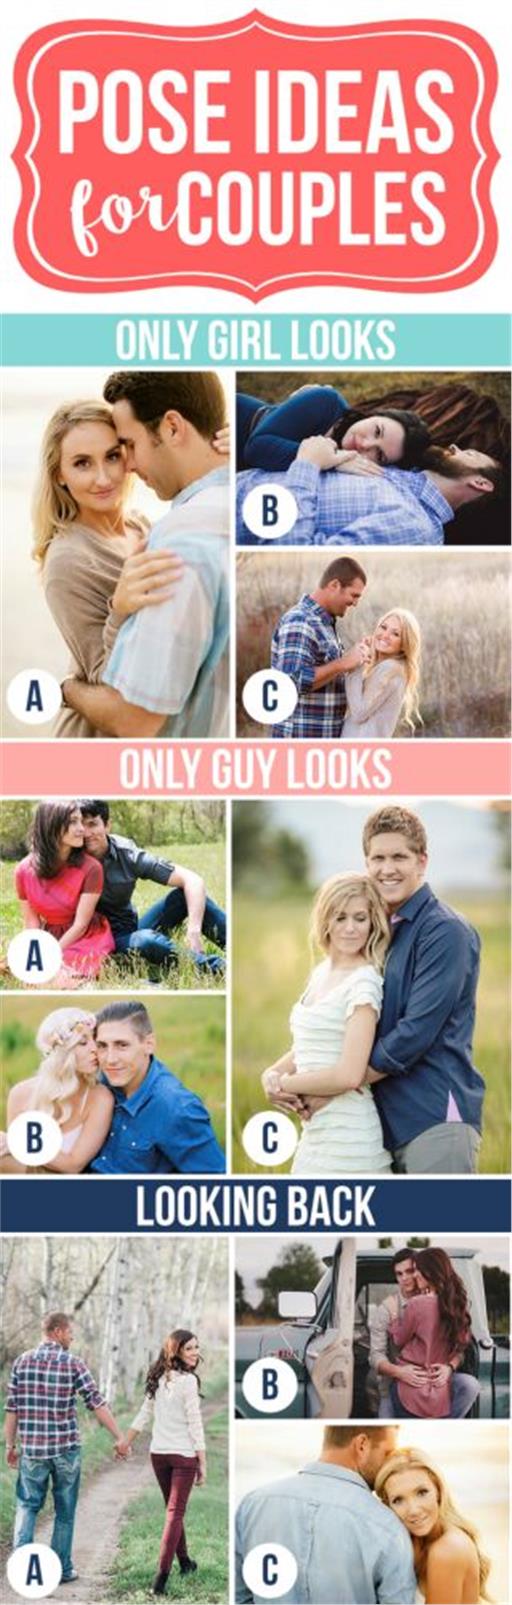 27396768_Pose_Ideas_for_Couples_4.limghandler